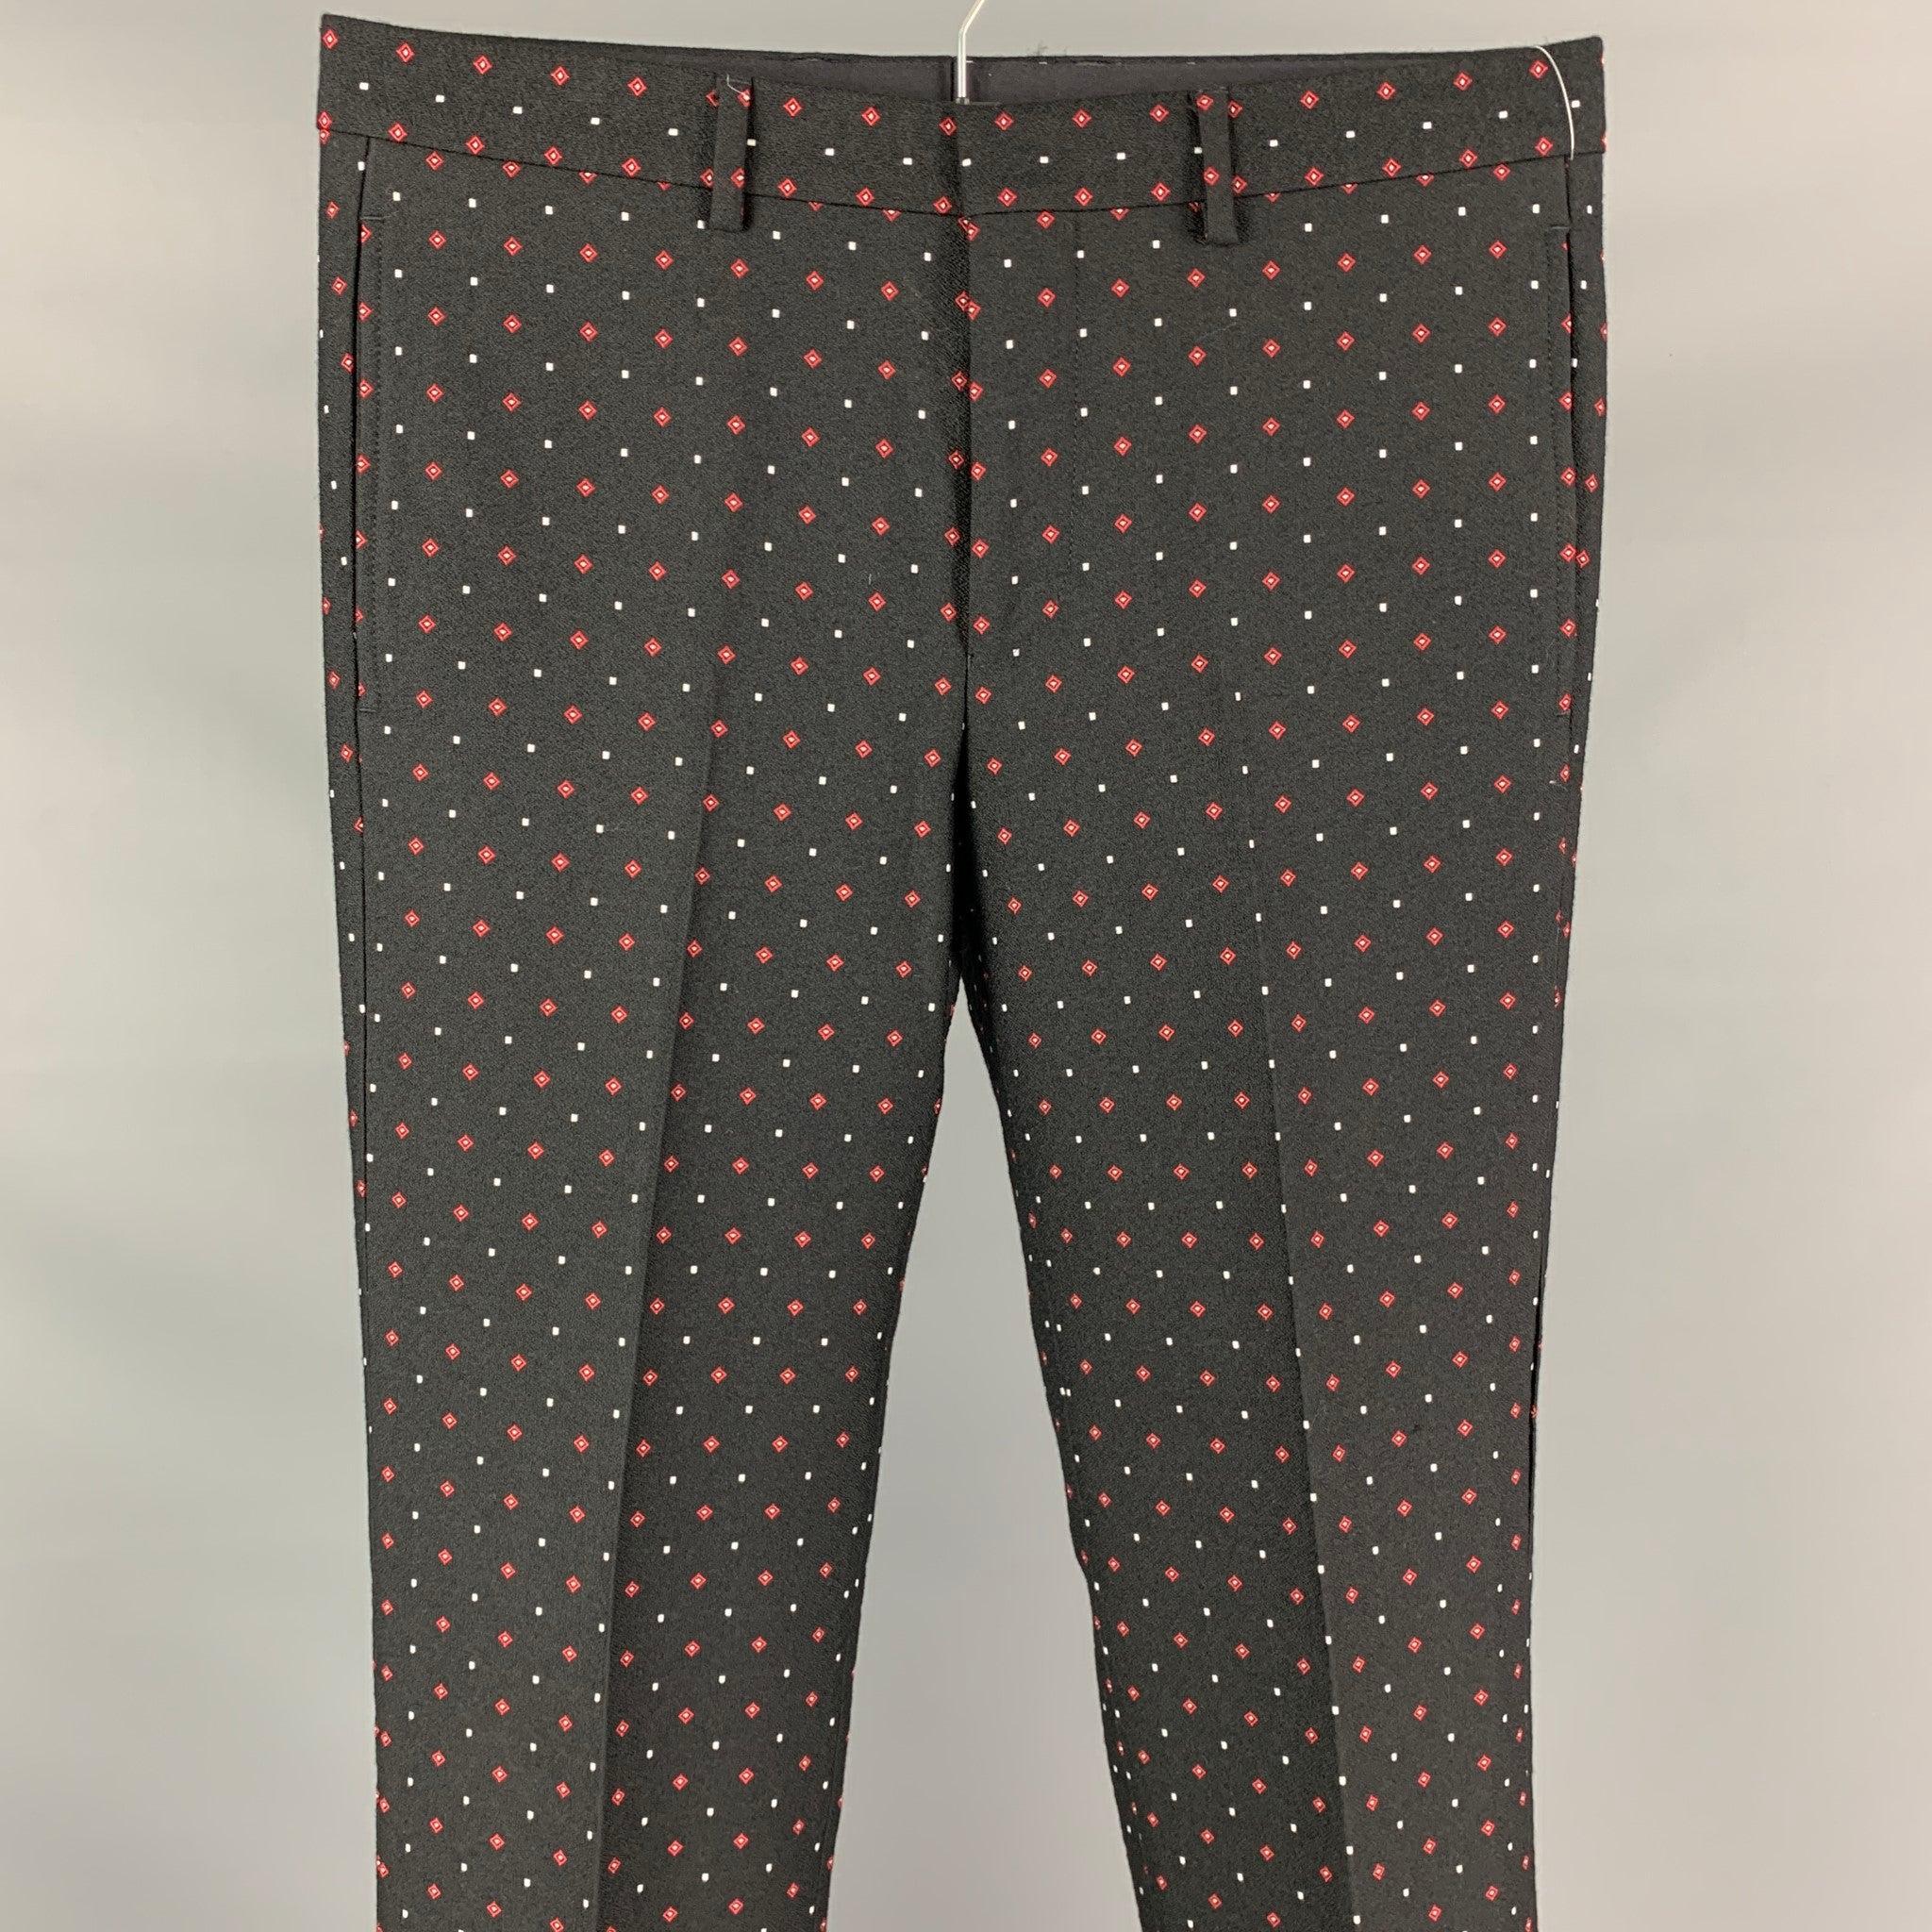 GIVENCHY dress pants comes in a black & red rhombus print wool / polyester featuring a slim fit, front tab, and a zip fly closure.
New With Tags. 

Marked:   48 

Measurements: 
  Waist: 32 inches  Rise: 9 inches  Inseam: 36 inches 
  
  
